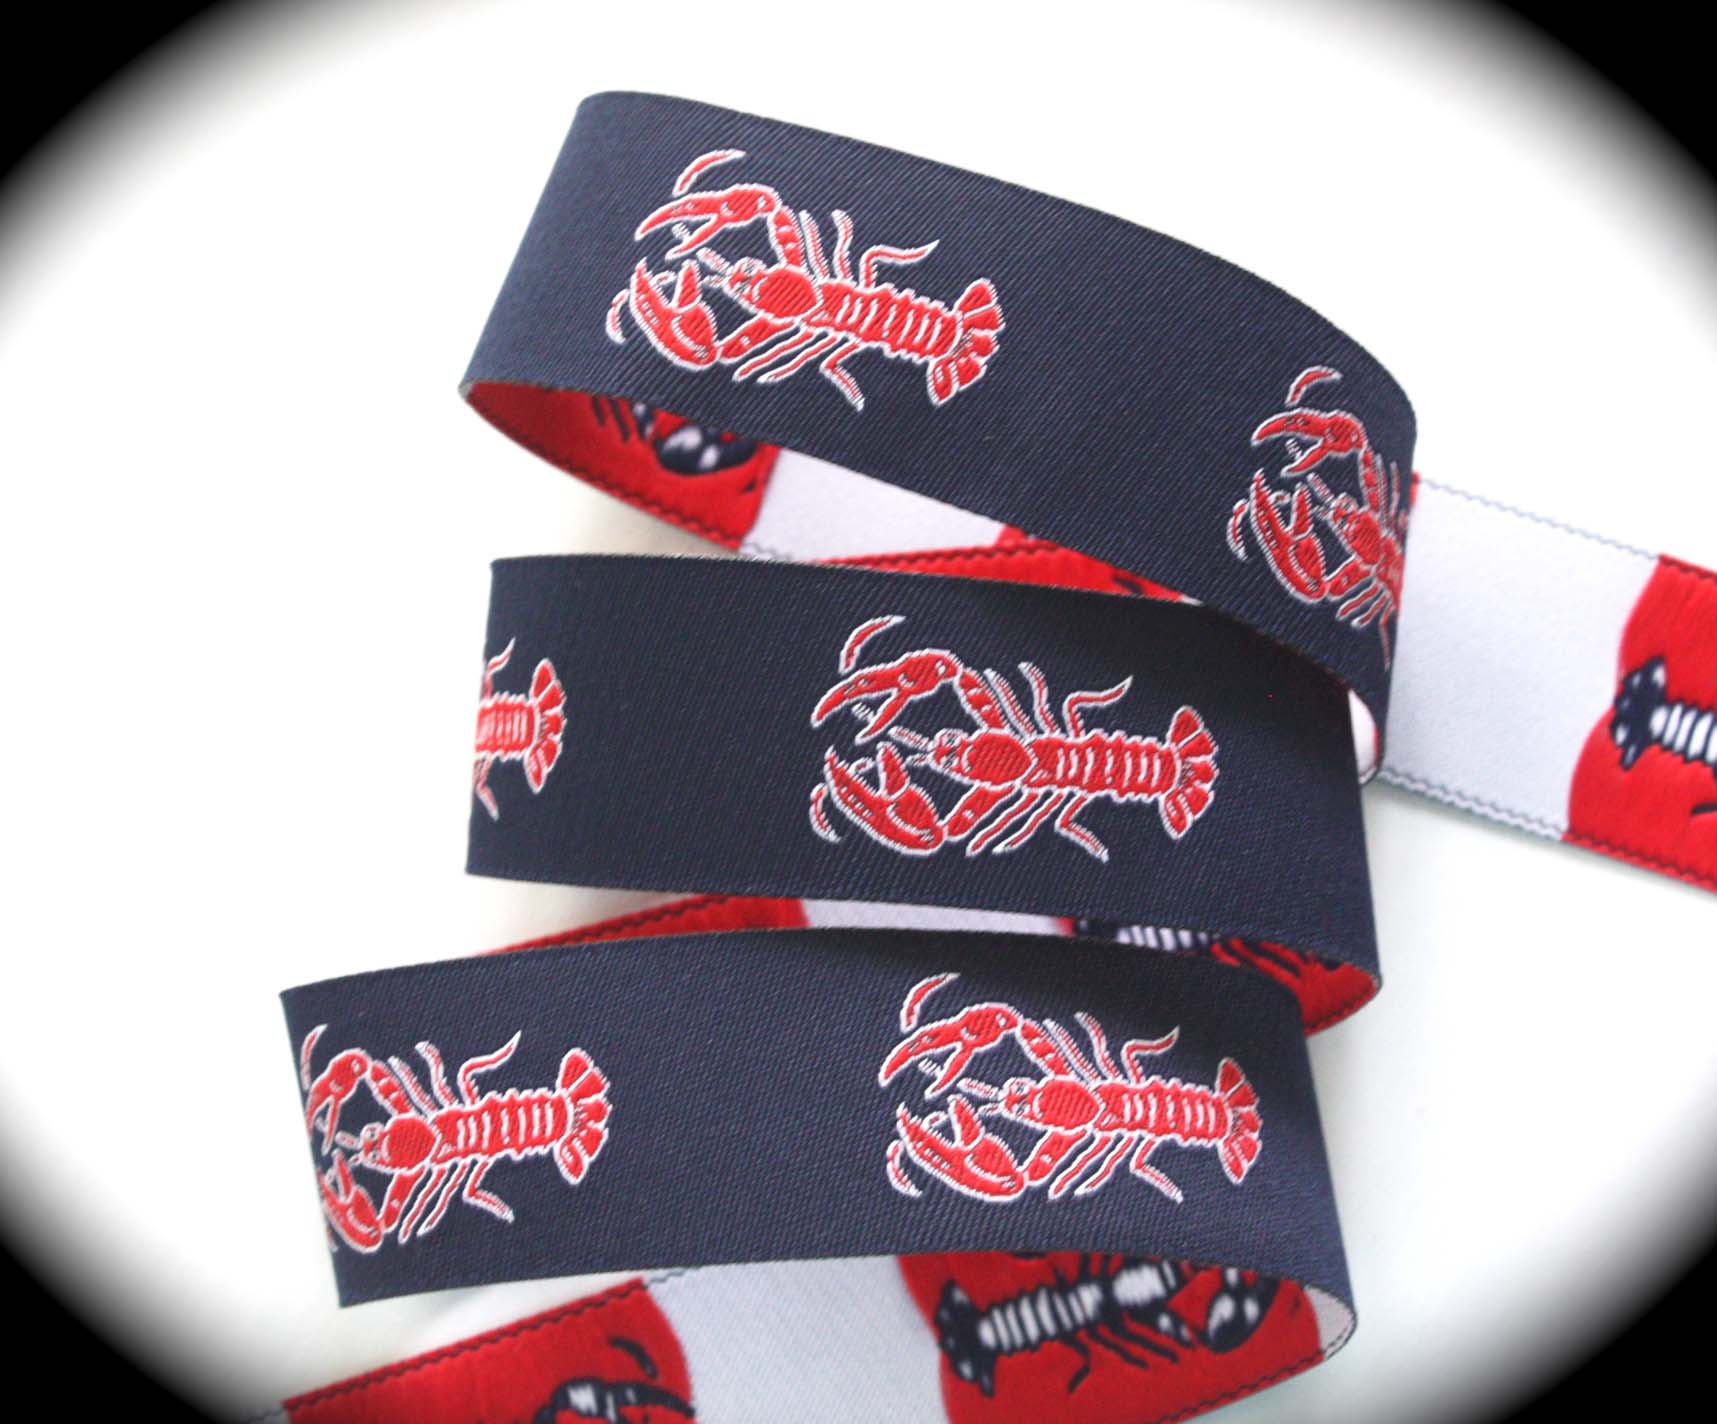 Lobster2015 1" x 3 yards Navy, Red and White